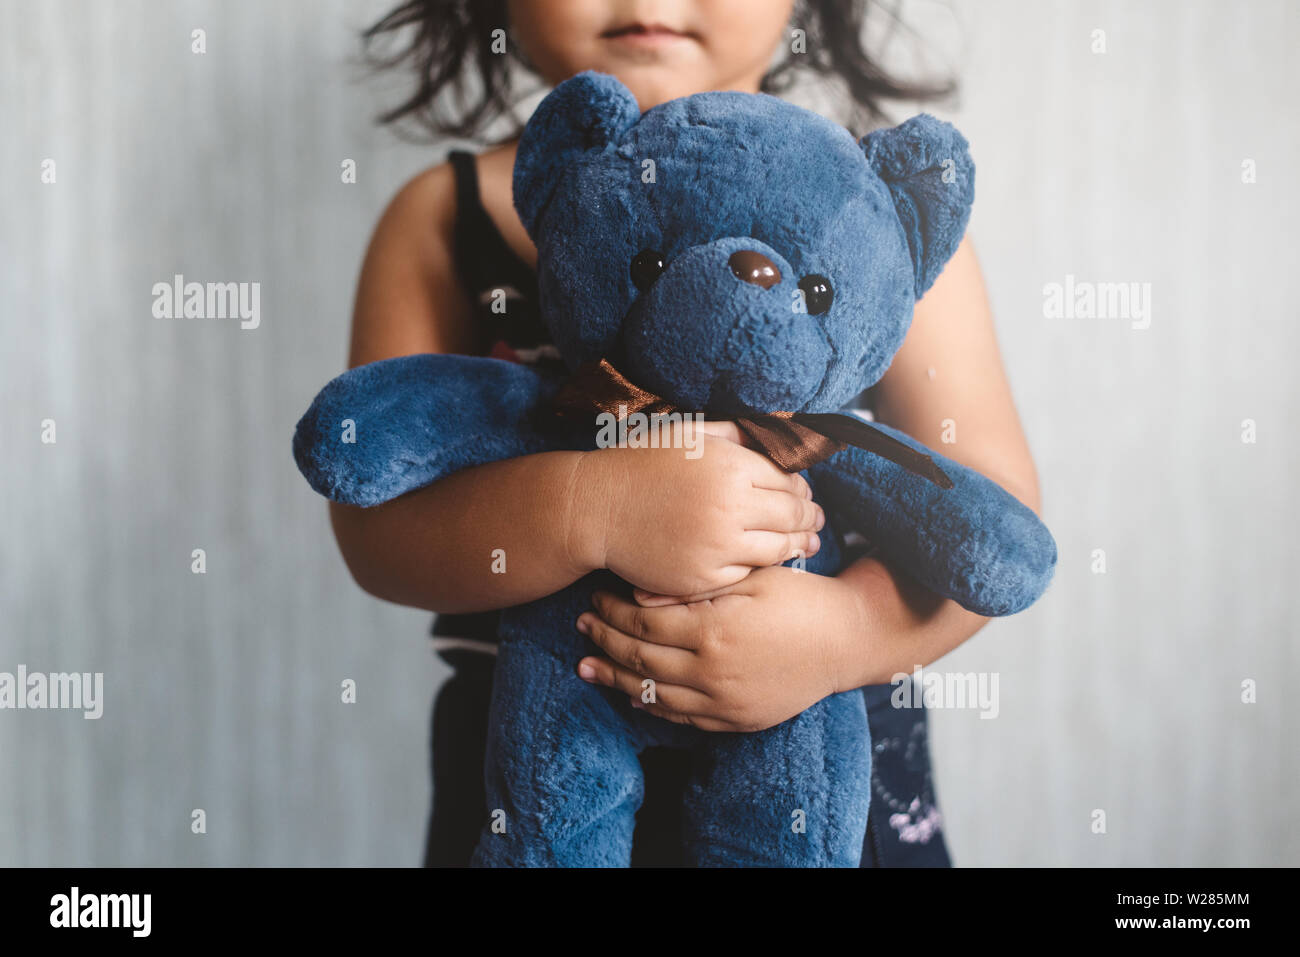 sweet little asian girl hugging her favorite toy teddy bear. Concept of Lonely child, love, childhood and parenting. Selective focus on the plush toy. Stock Photo